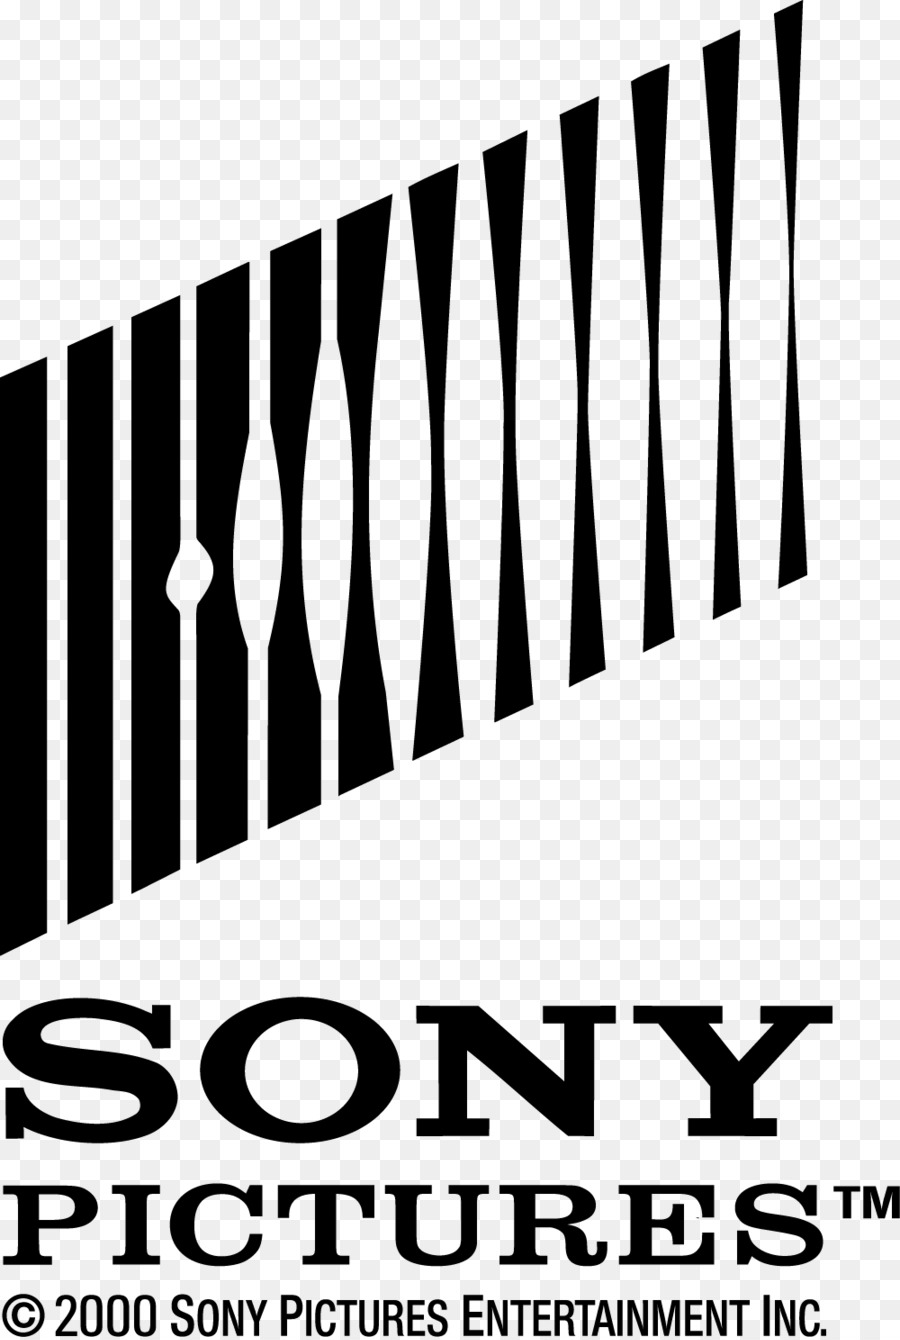 Sony Pictures Logo - vaio png download - 1000*1485 - Free Transparent Sony Pictures png Download.